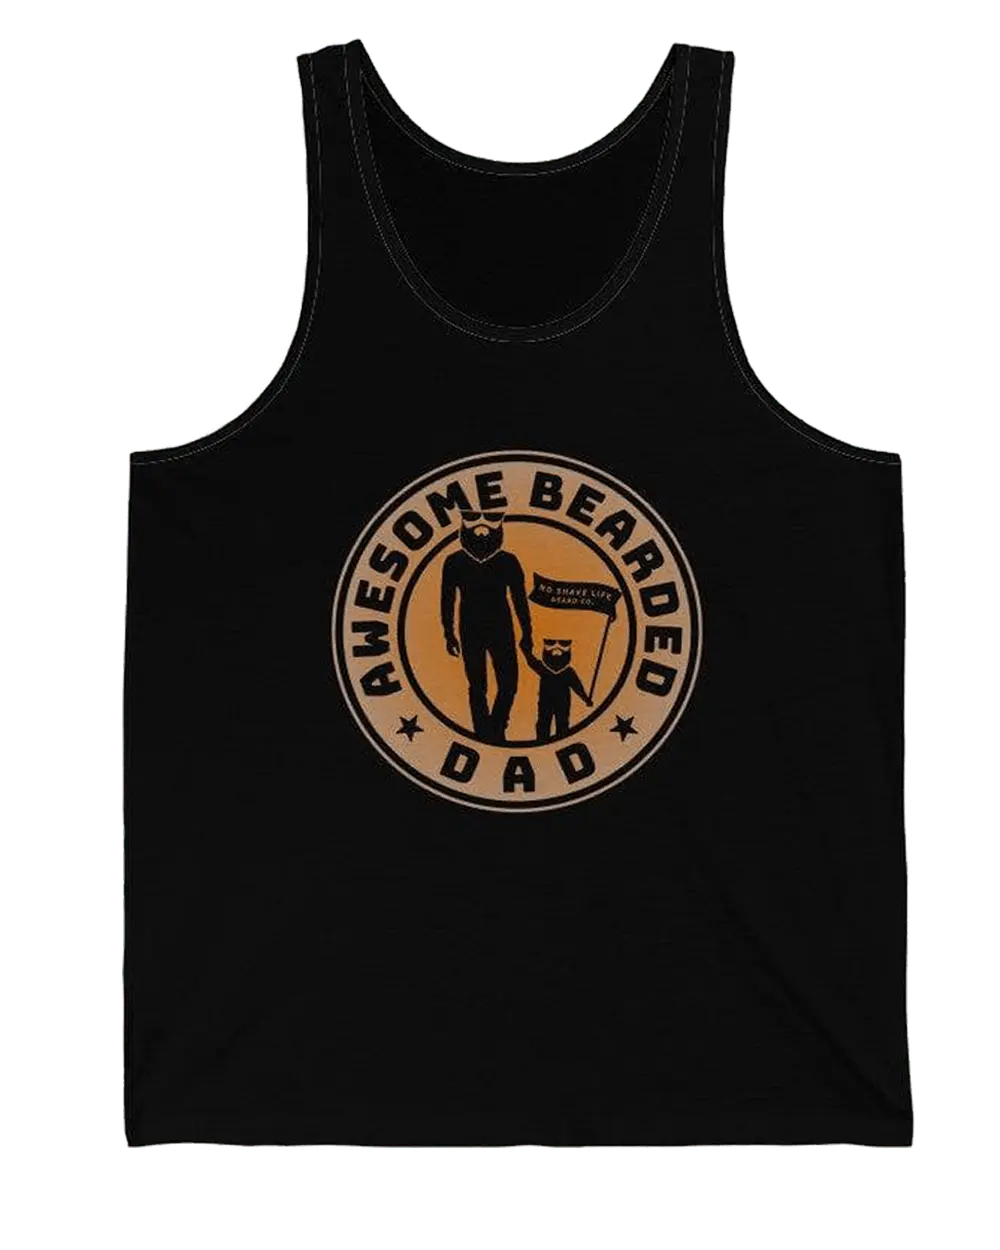 Awesome Bearded Dad Black Men's Tank Top|Mens Tank Top